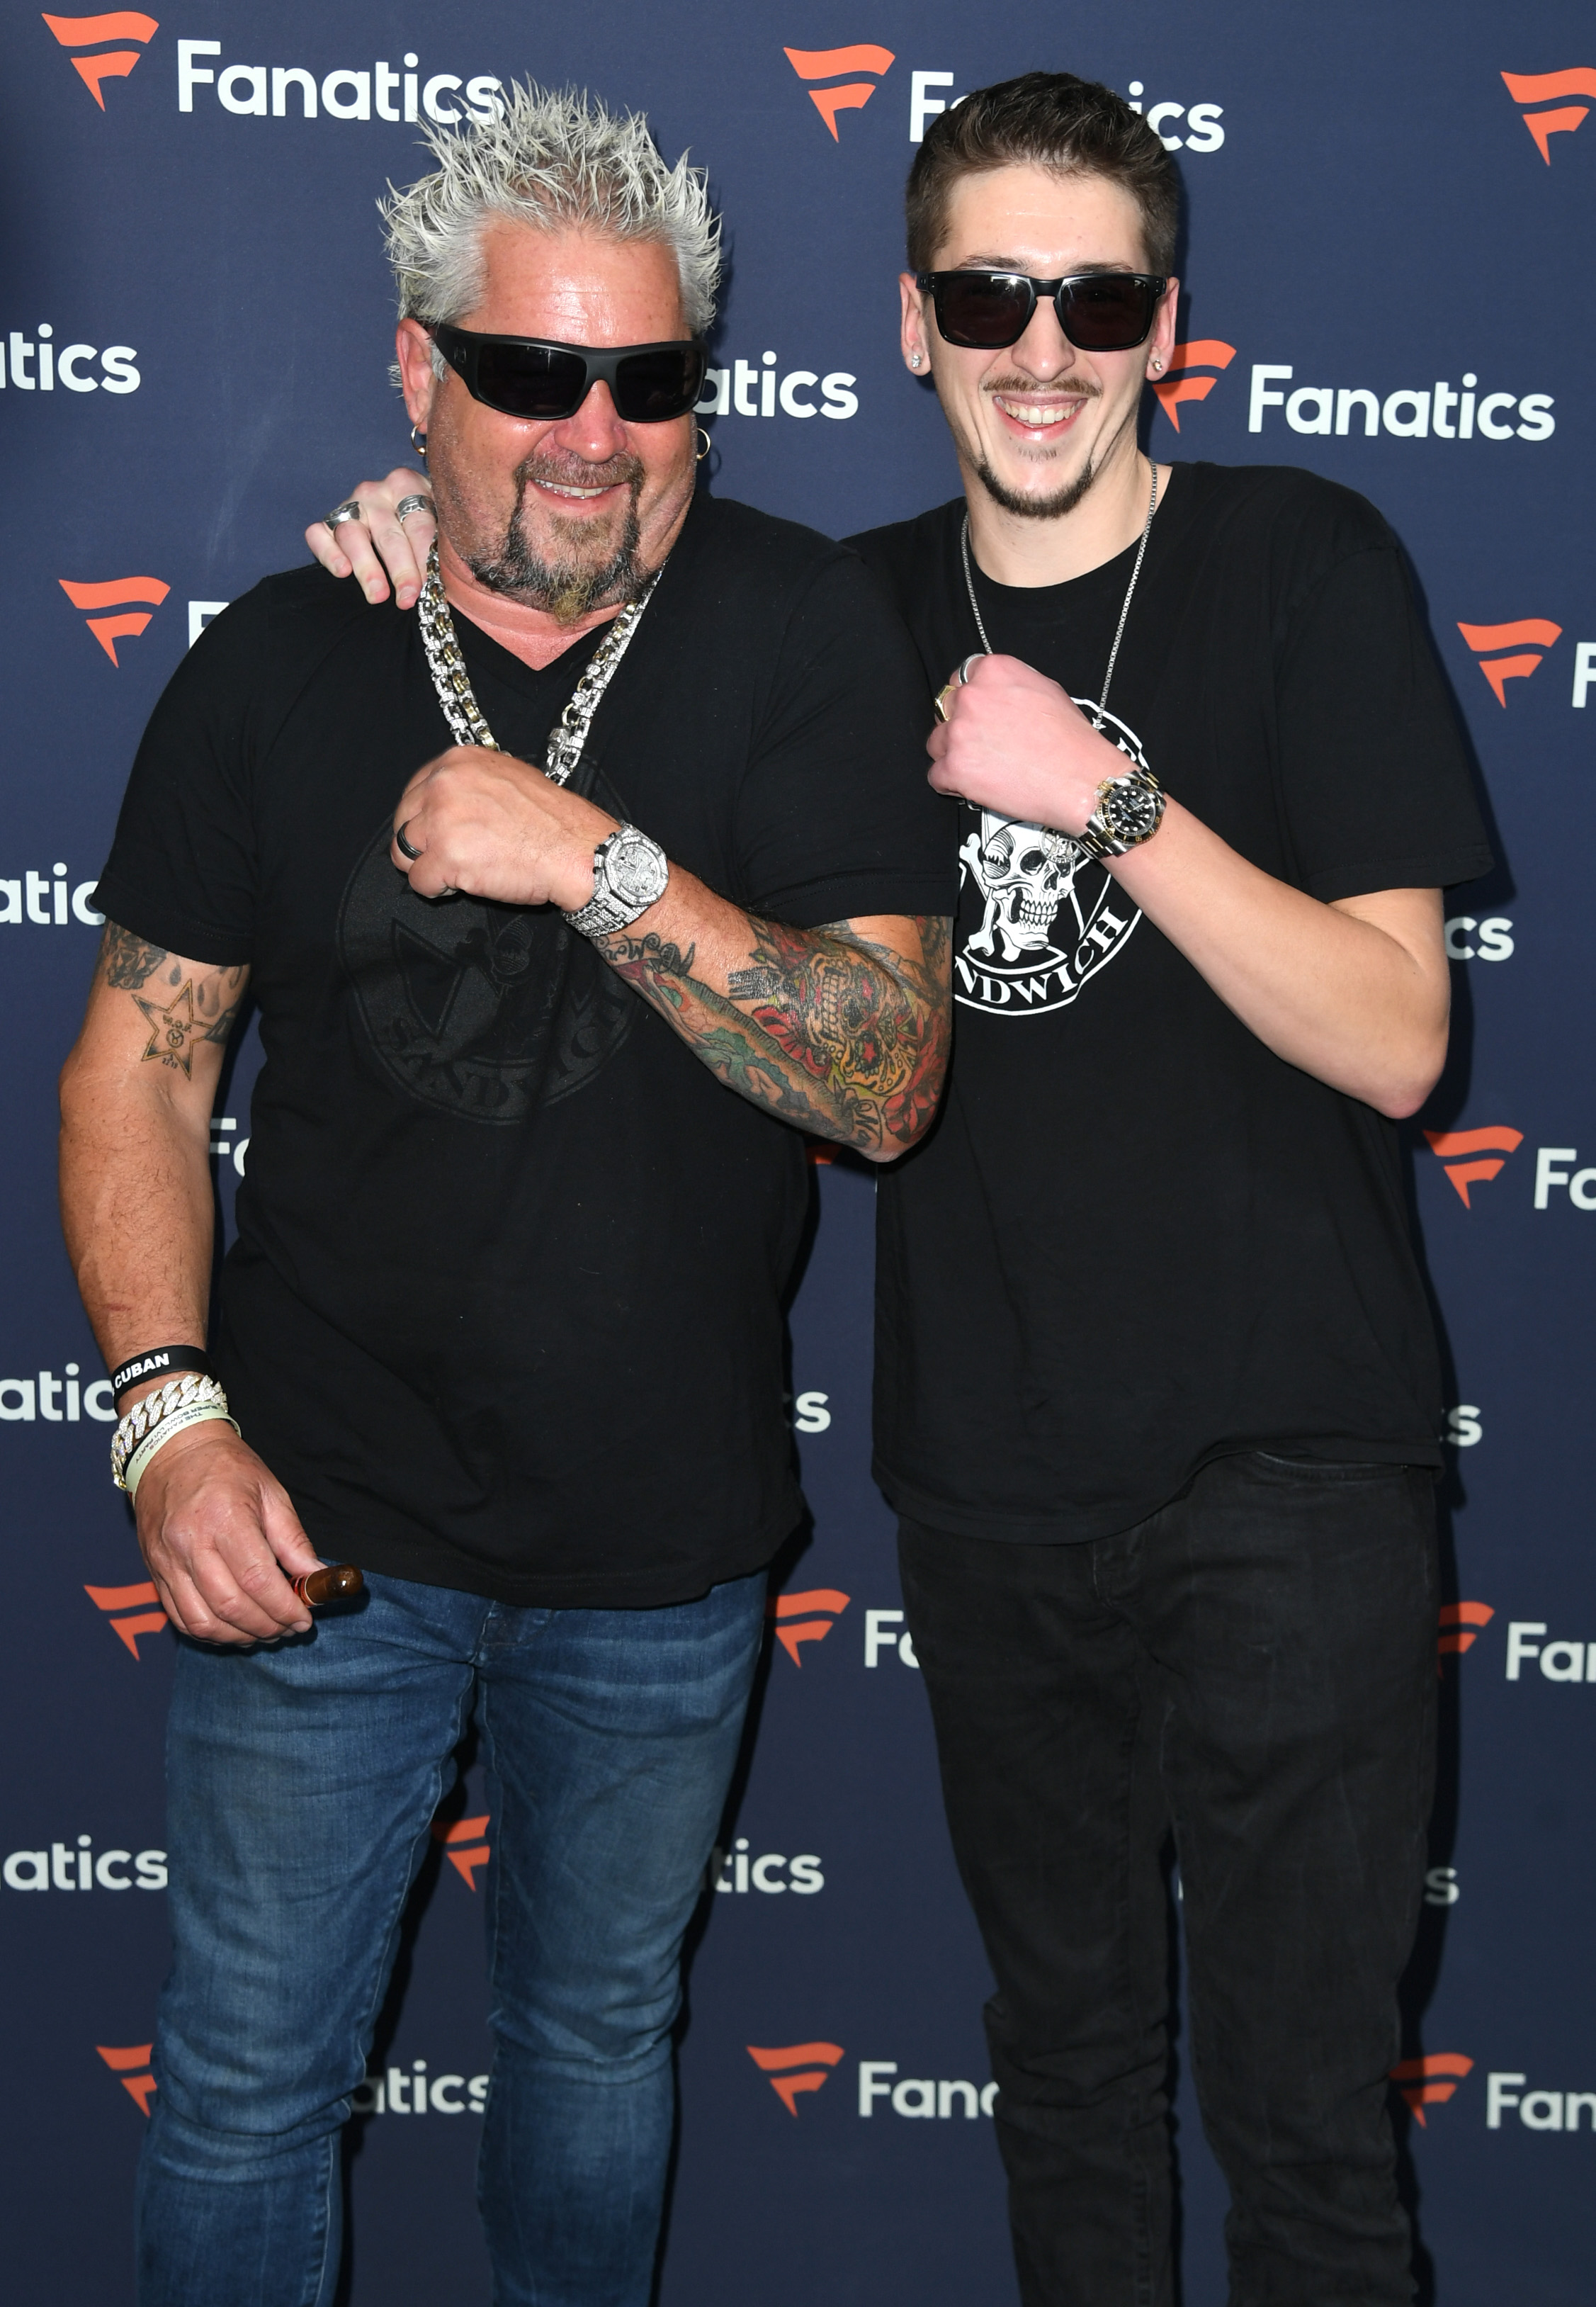 Guy and Hunter Fieri at the Fanatics Super Bowl Party on February 12, 2022, in Culver City, California | Source: Getty Images